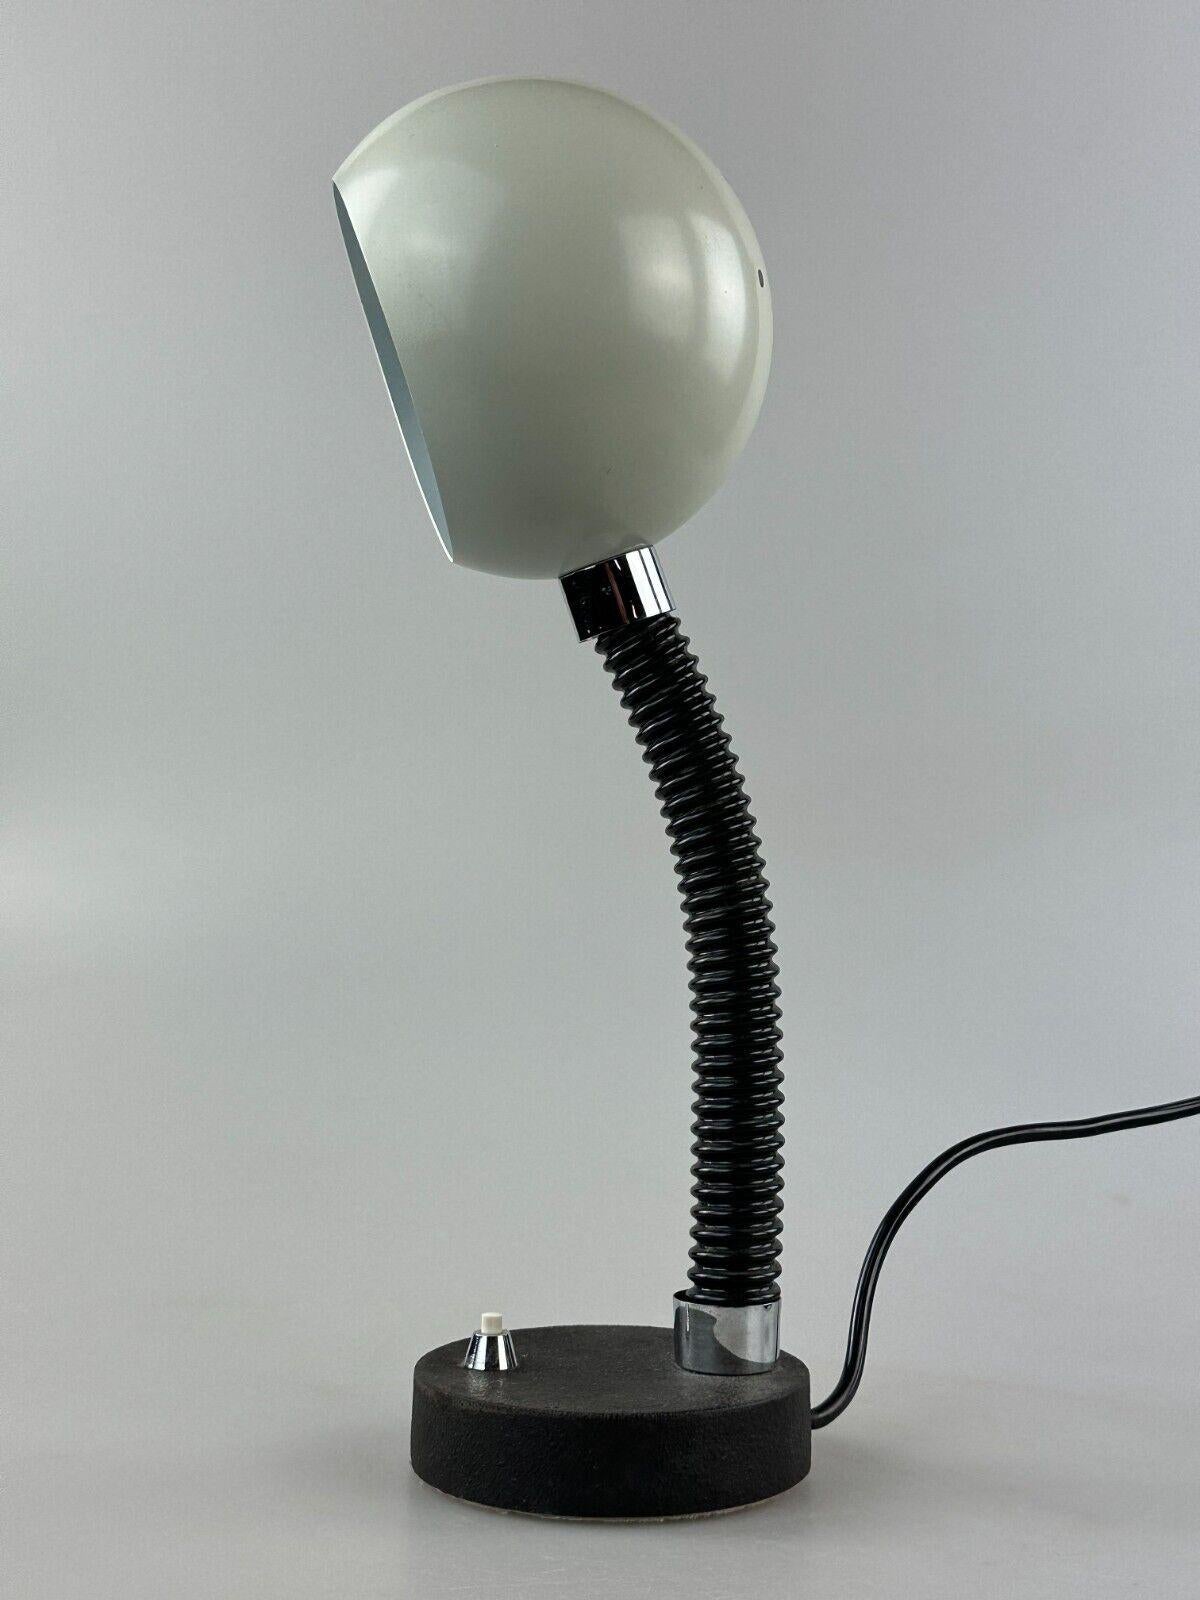 60s 70s table lamp Egon Hillebrand spherical lamp Space Age metal design For Sale 2